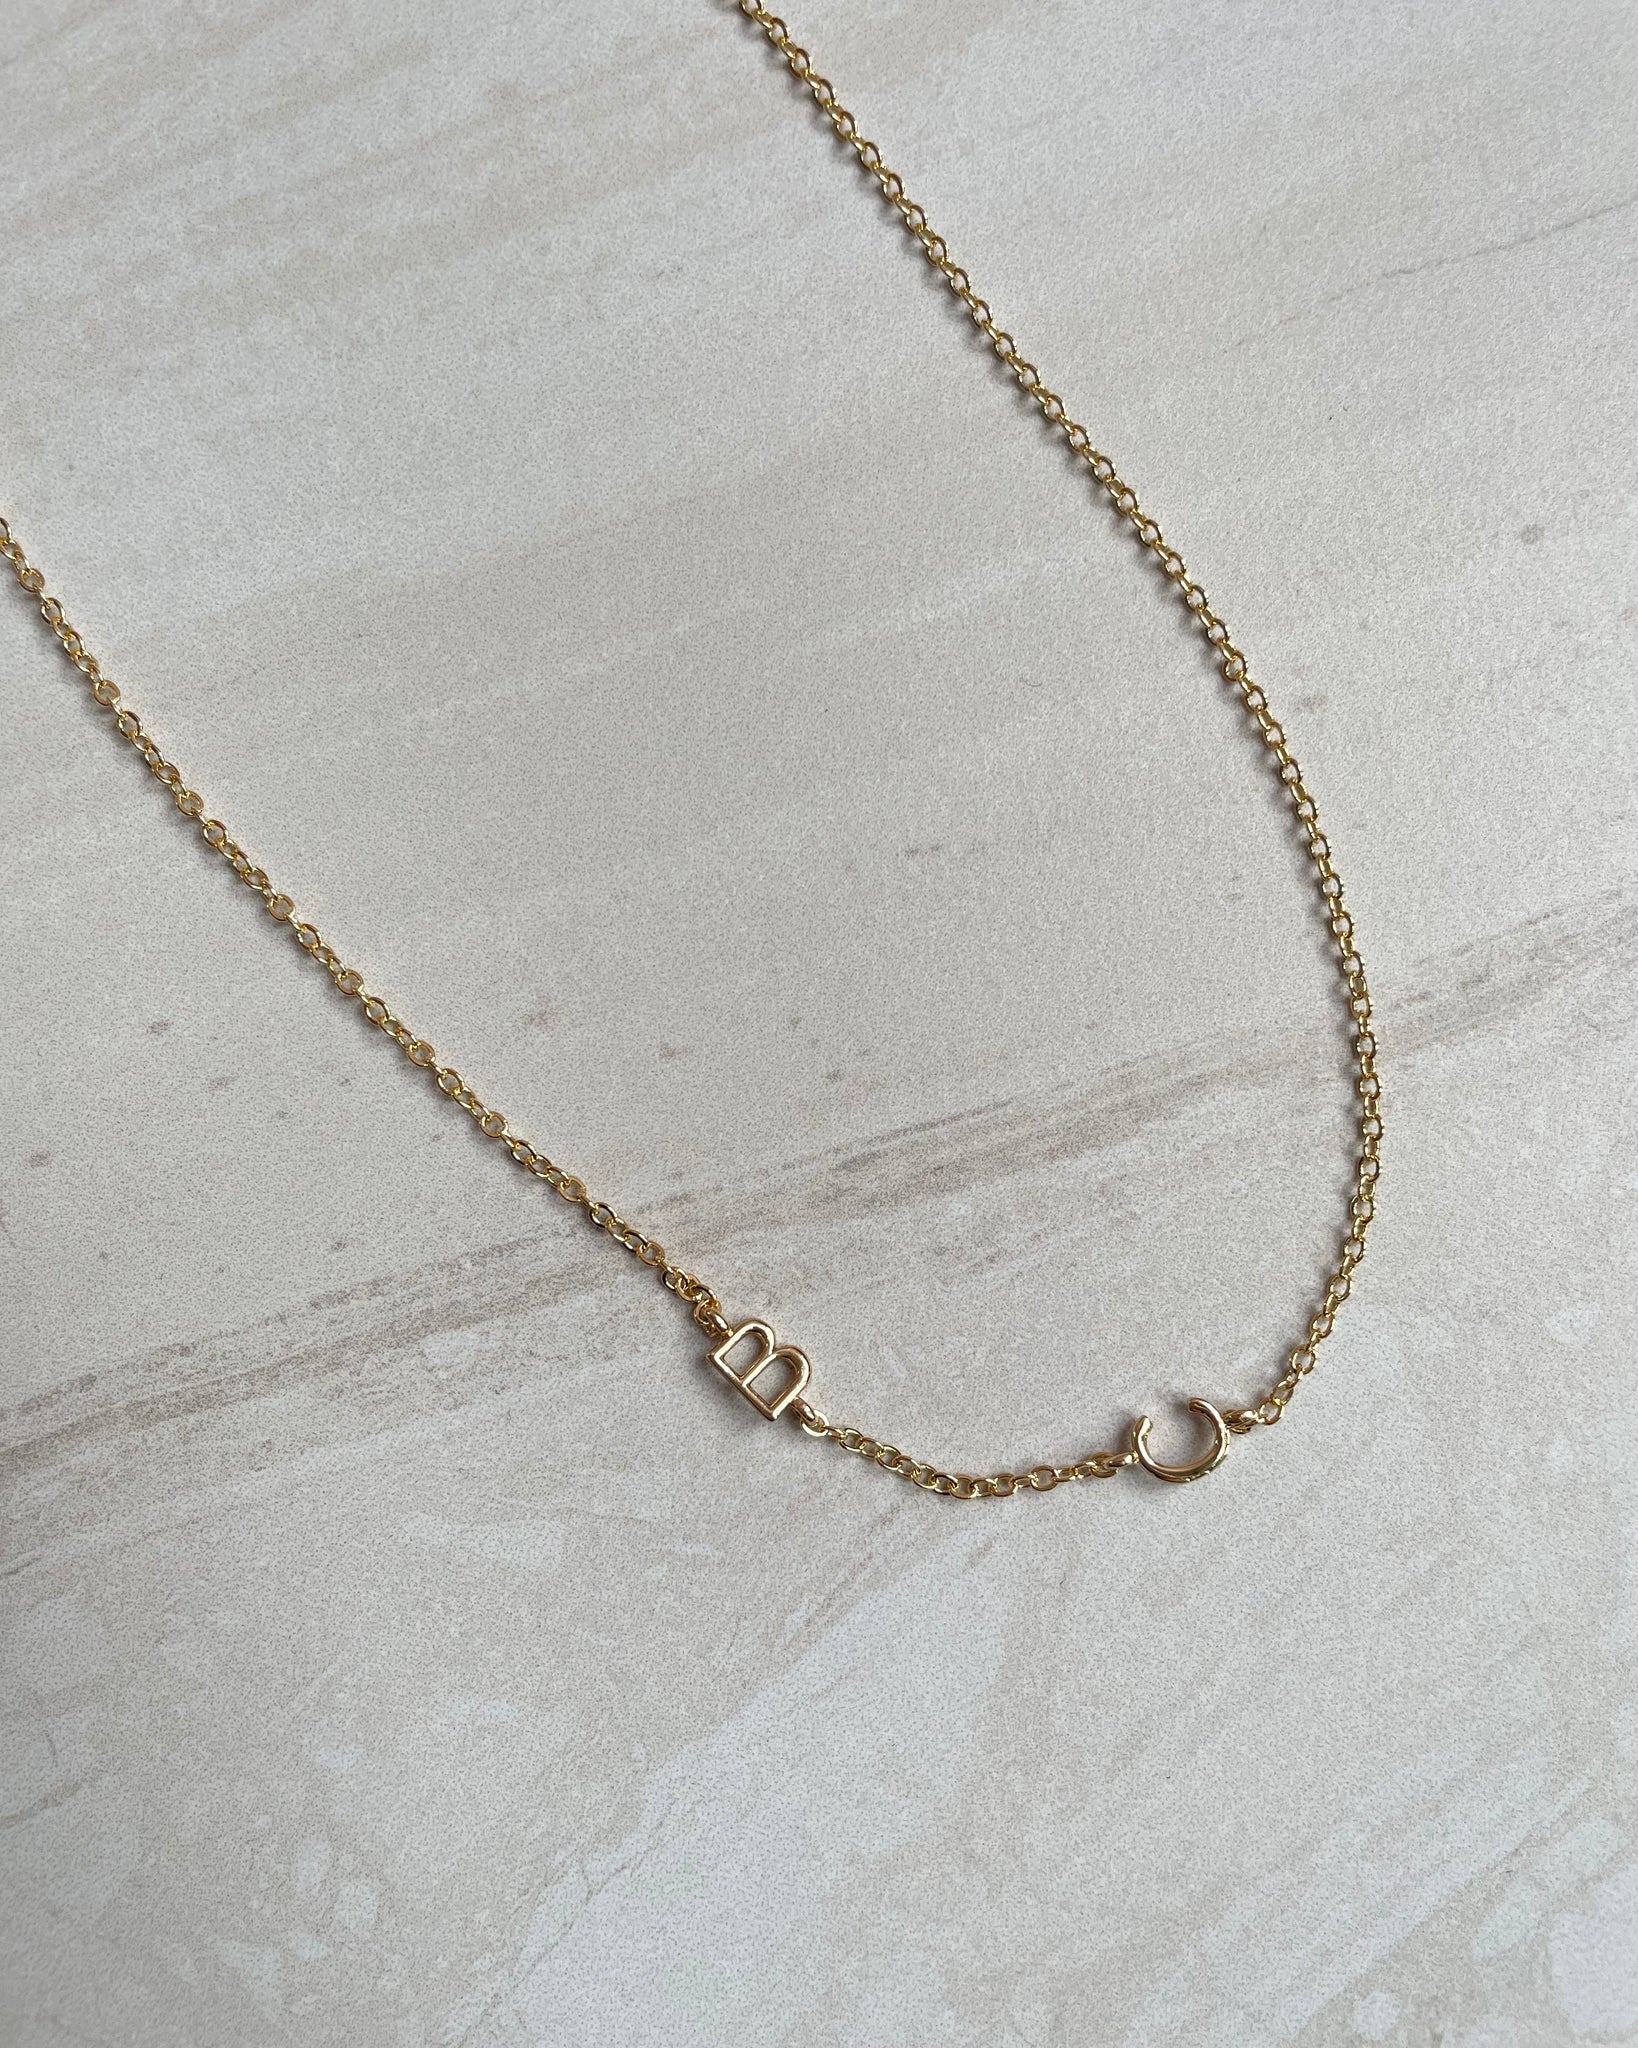 Sideways Initial Letter Necklace